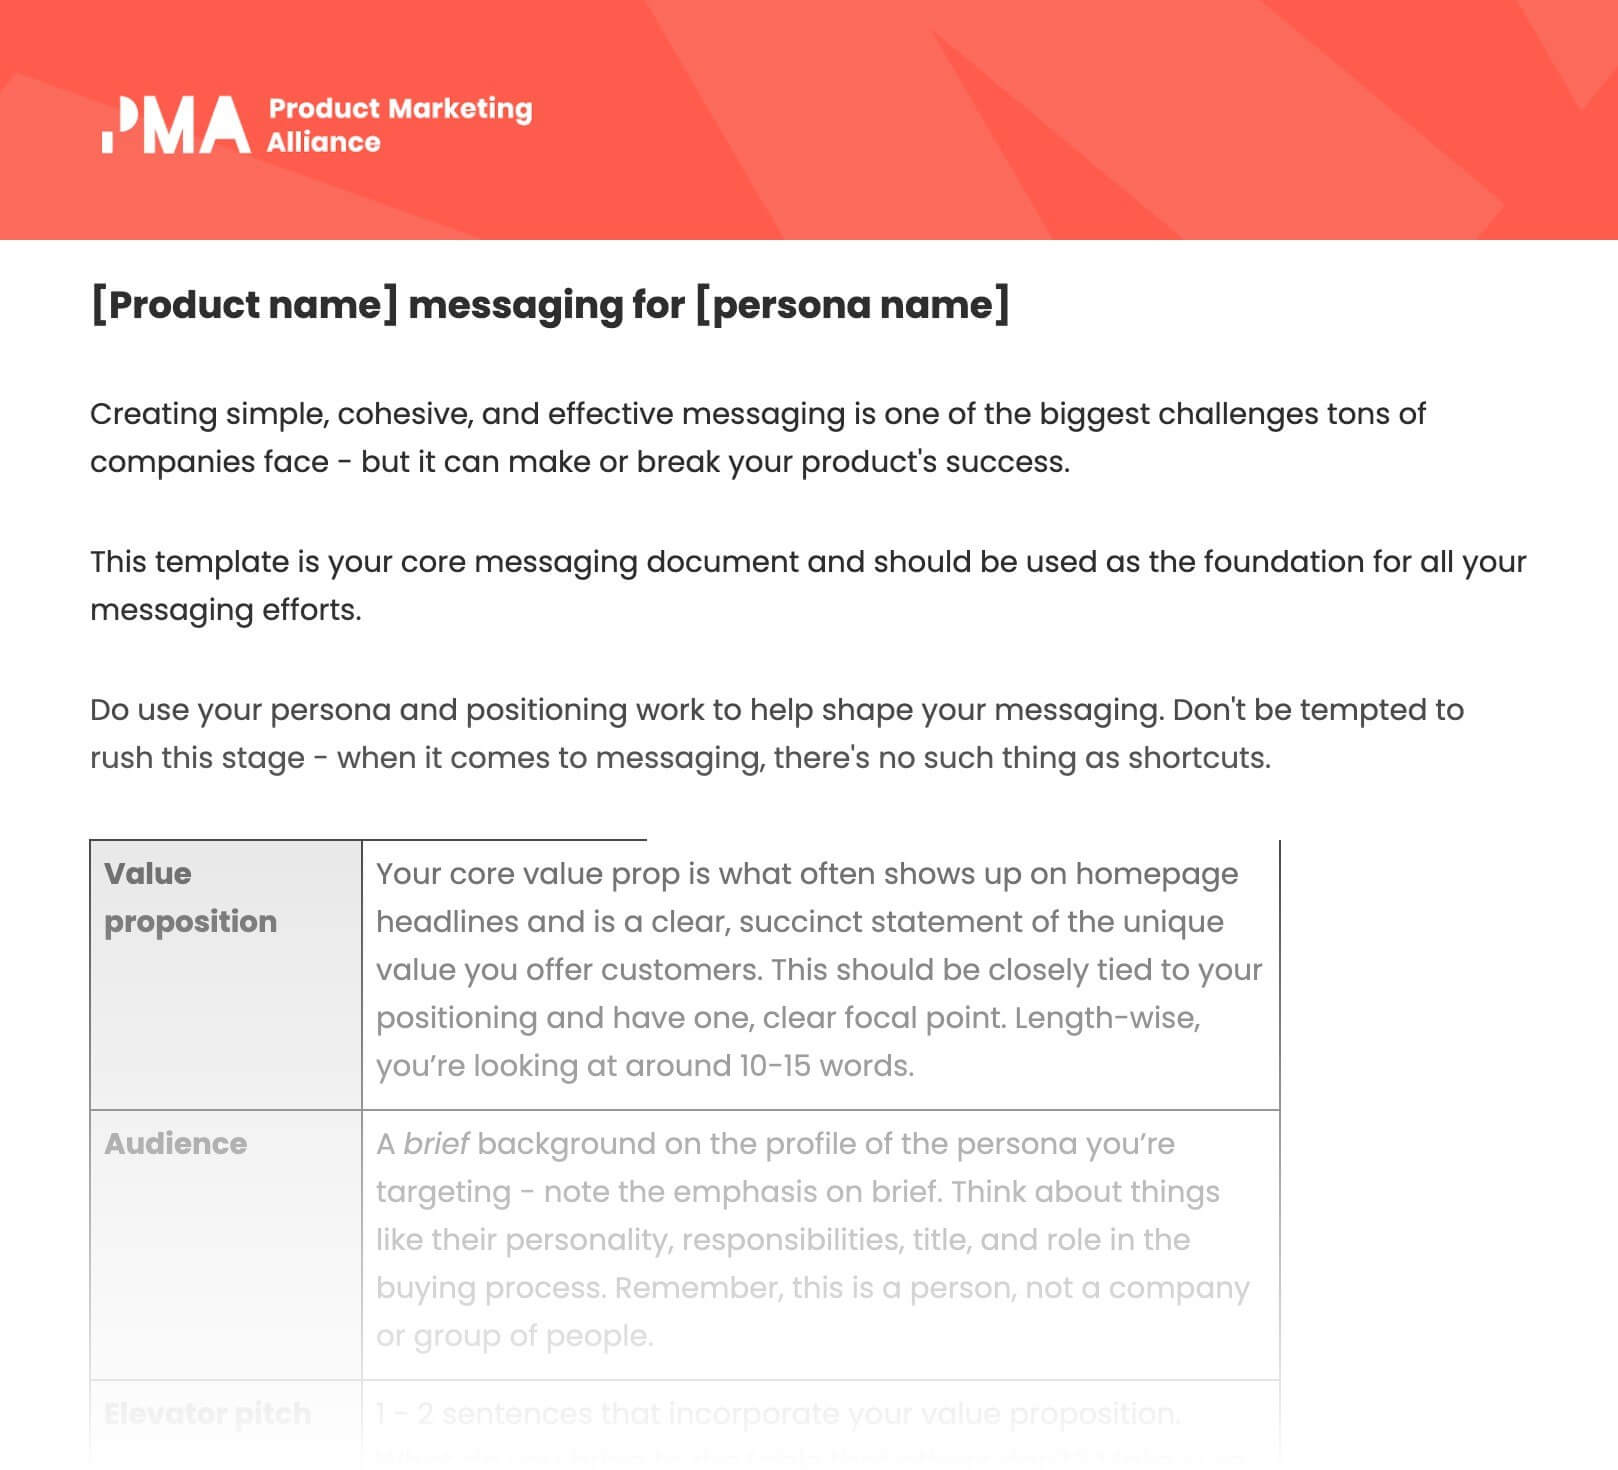 Messaging framework available in the Product Marketing Alliance membership.